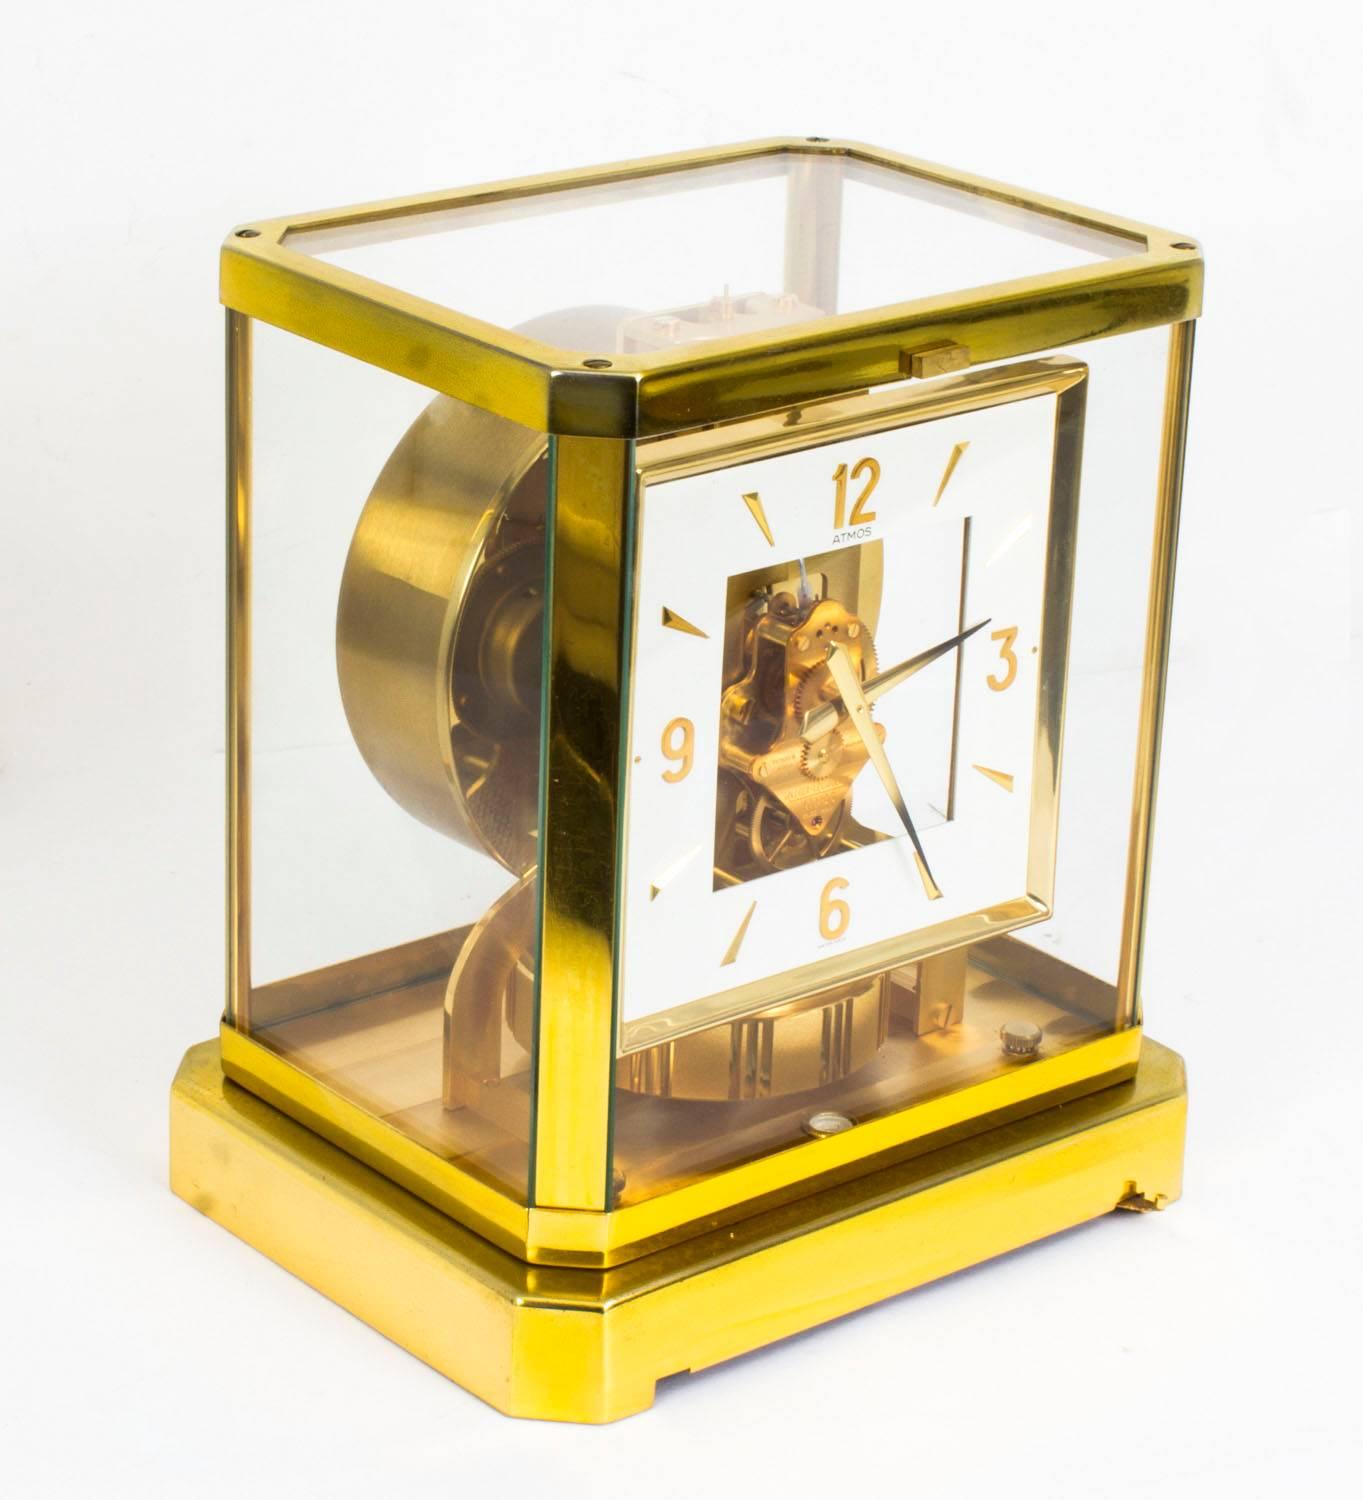 This is beautiful and very decorative Vintage Atmos mantel clock by Jaeger-LeCoultre and bearing their engraved signature on the movement.

The clock is displayed in a beautiful polished gilt brass rectangular case.

The clock self-winds and